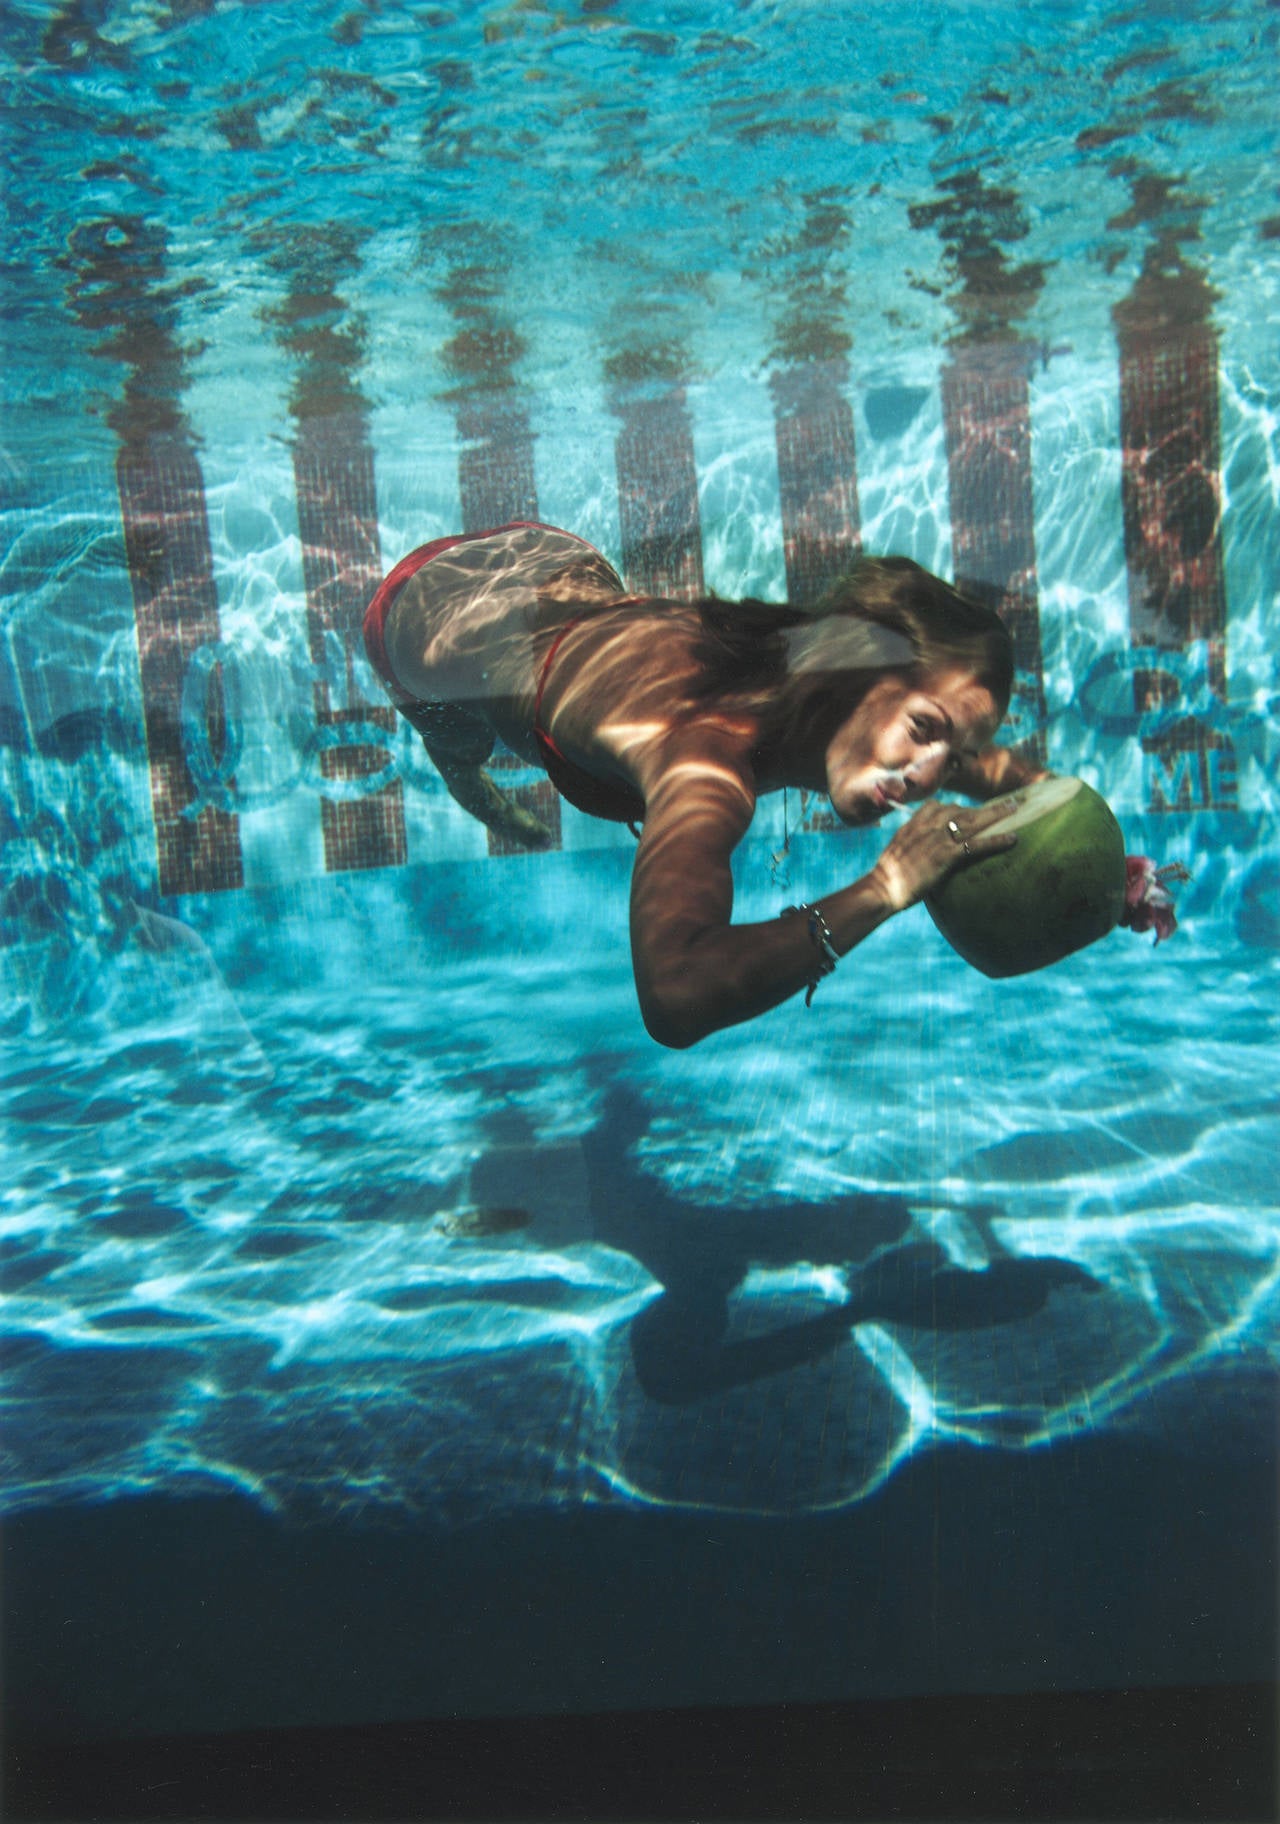 A woman drinking from a coconut underwater in the pool at Las Brisas Hotel in Acapulco, Mexico, February 1972. 

Estate stamped and hand numbered edition of 150 with certificate of authenticity from the Slim Aarons Estate. 

Slim Aarons (1916-2006)